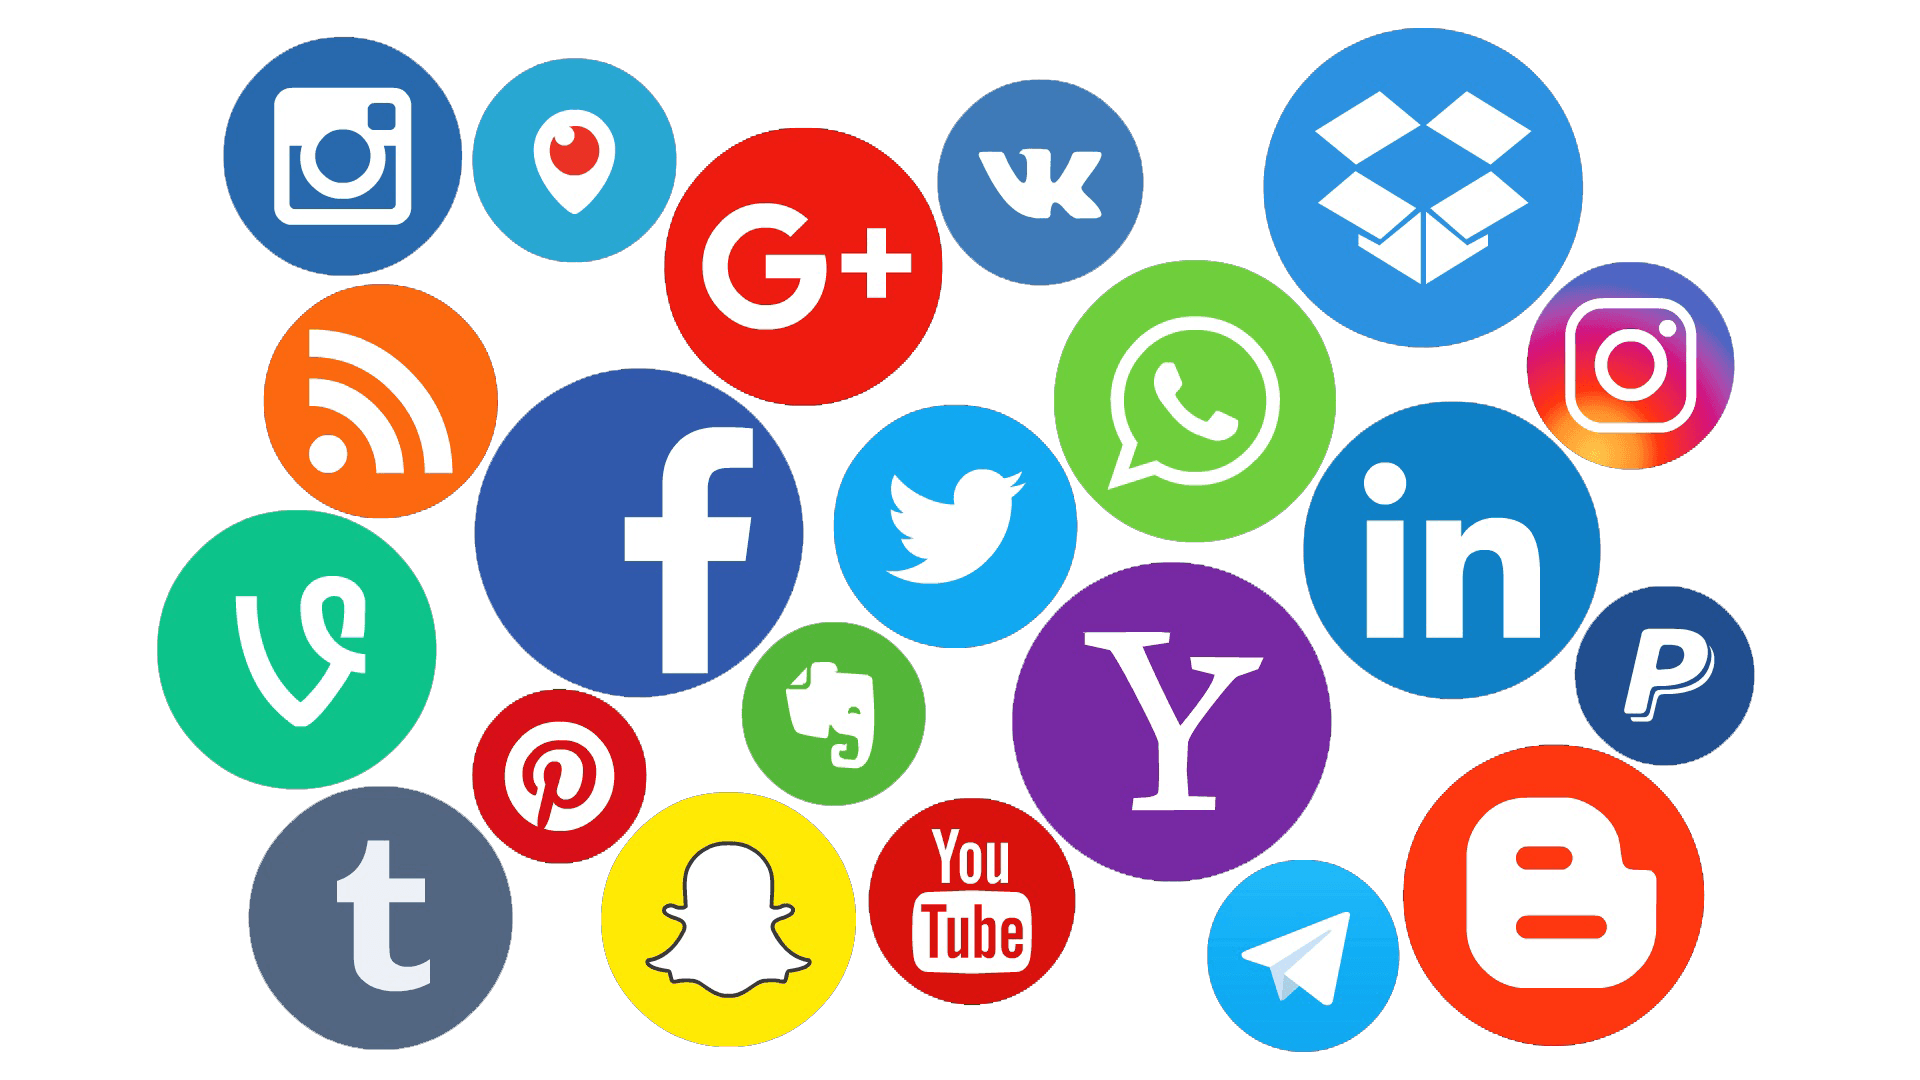 Collage of popular social media logos or a screen displaying a brand's social media profile with high engagement metrics.